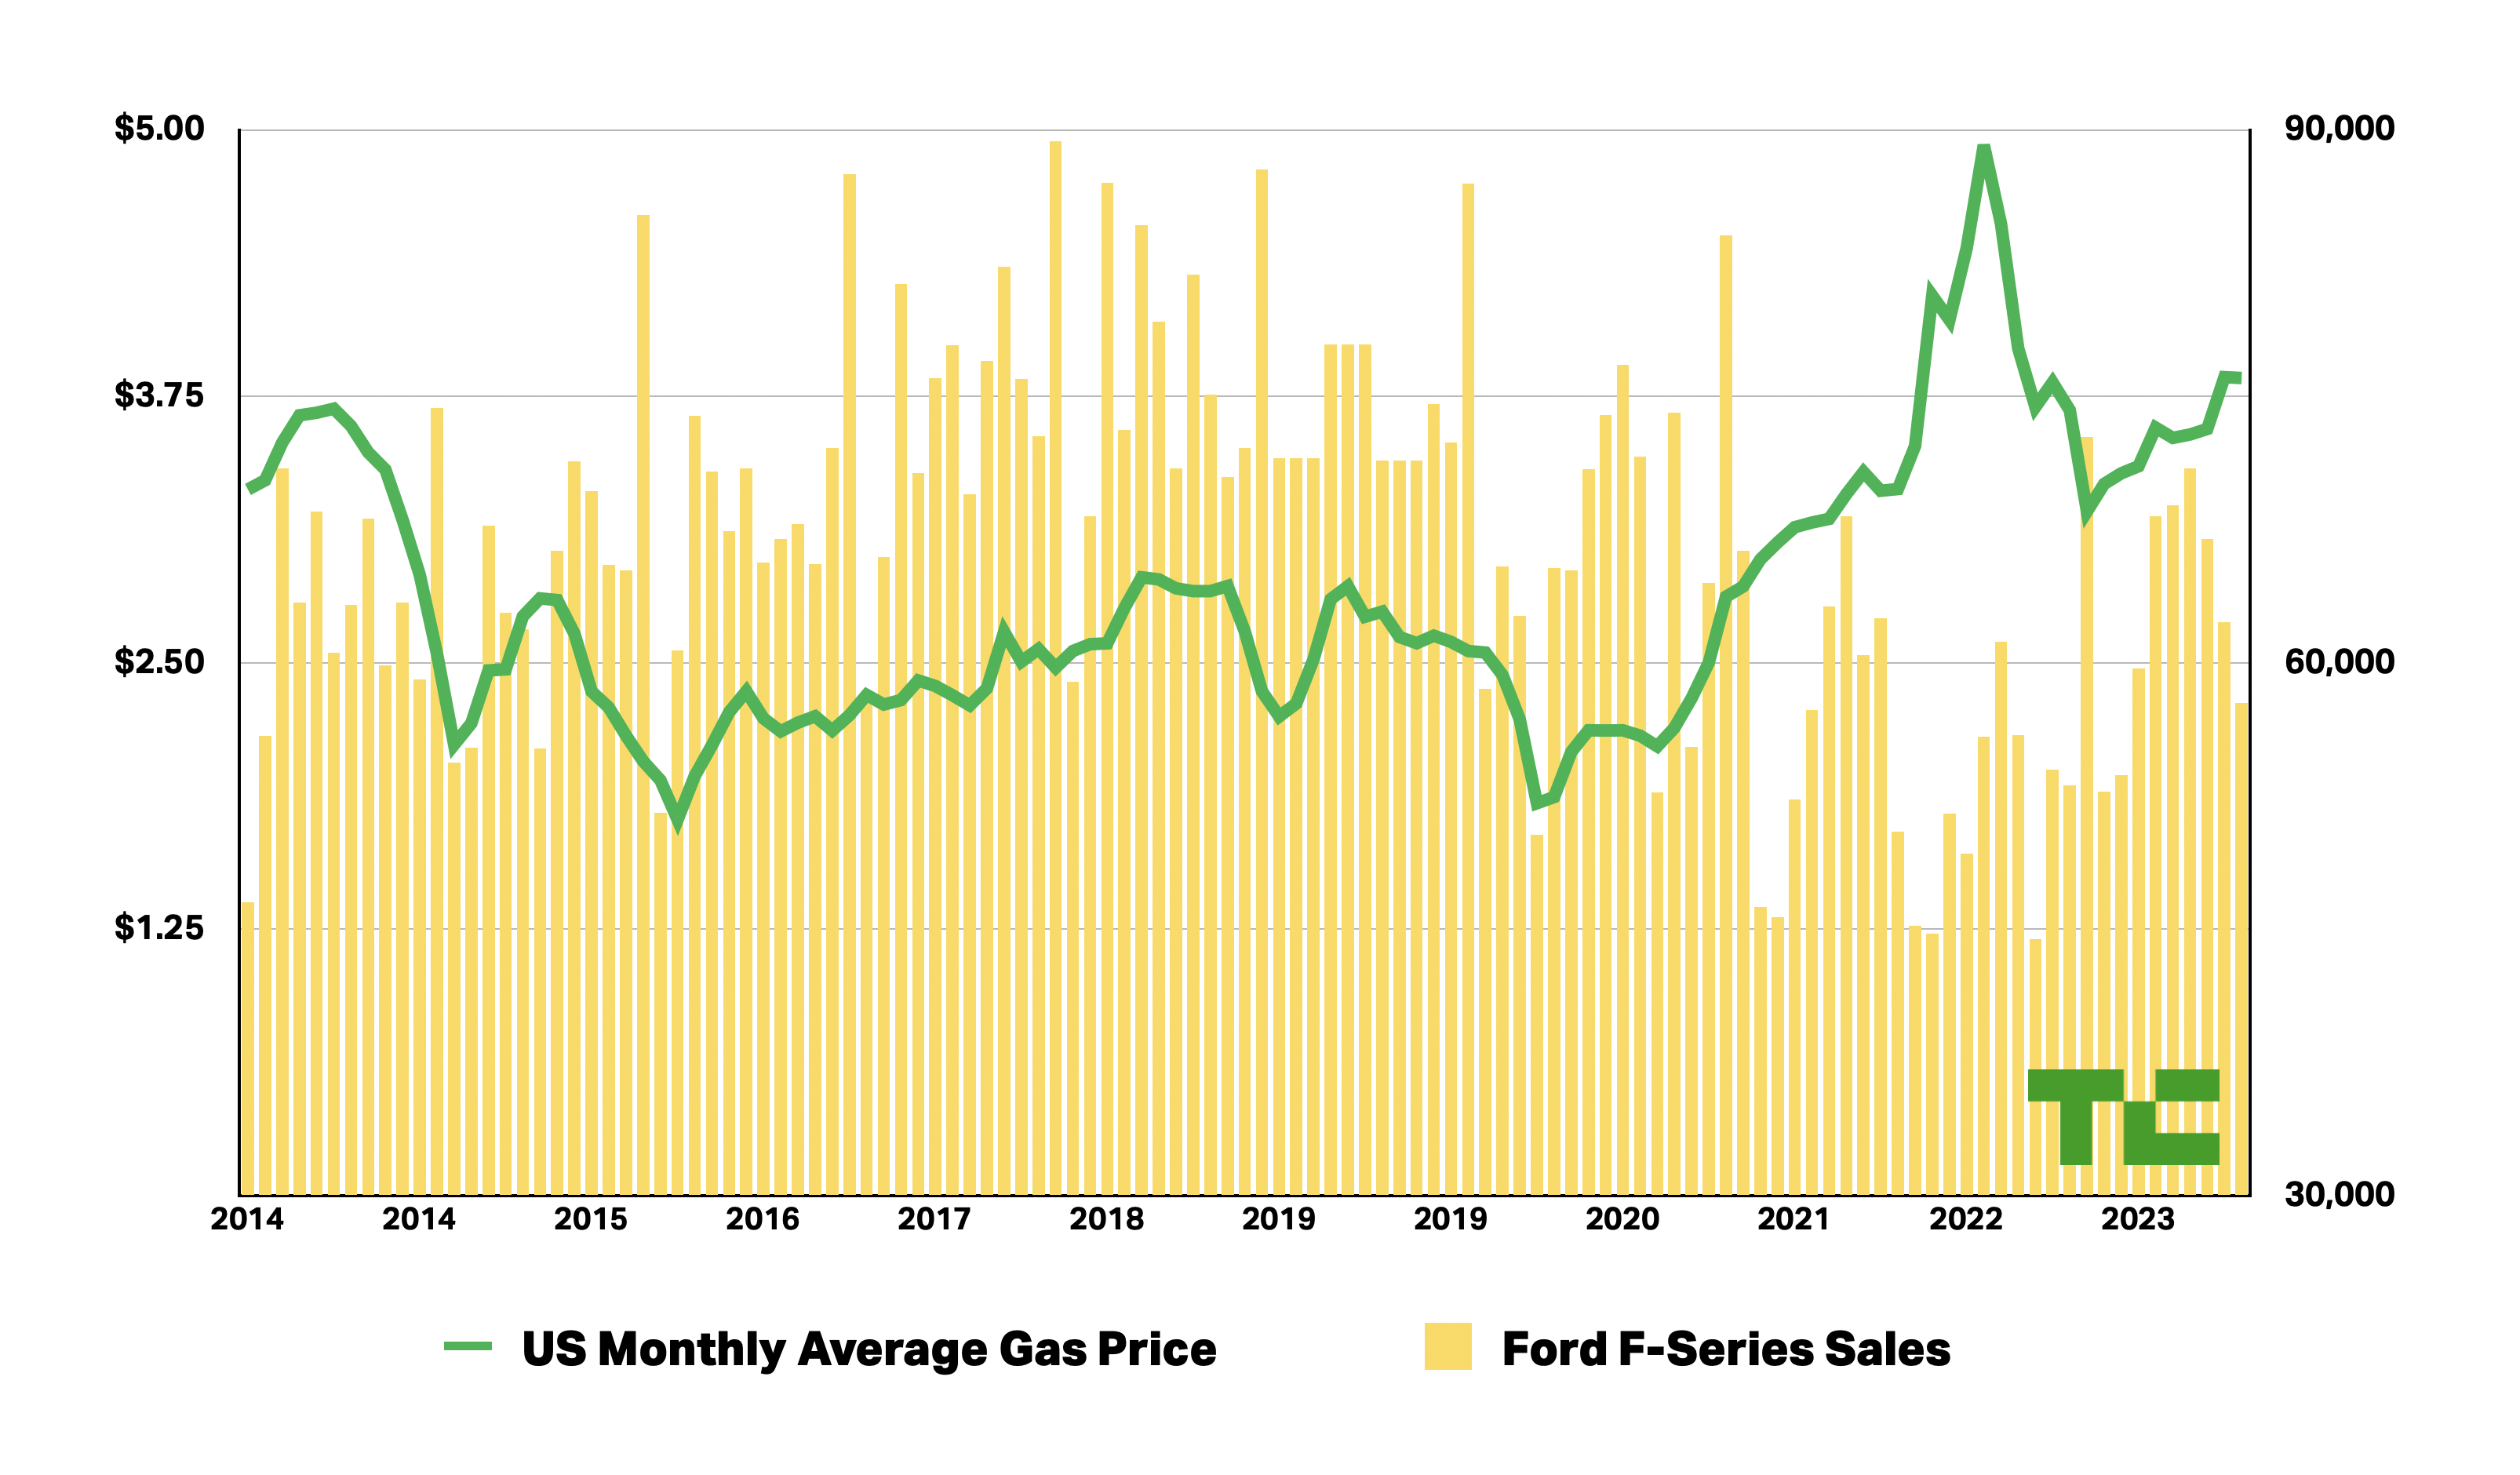 Ford F-Series sales are plotted against US gasoline prices 2014-2023.